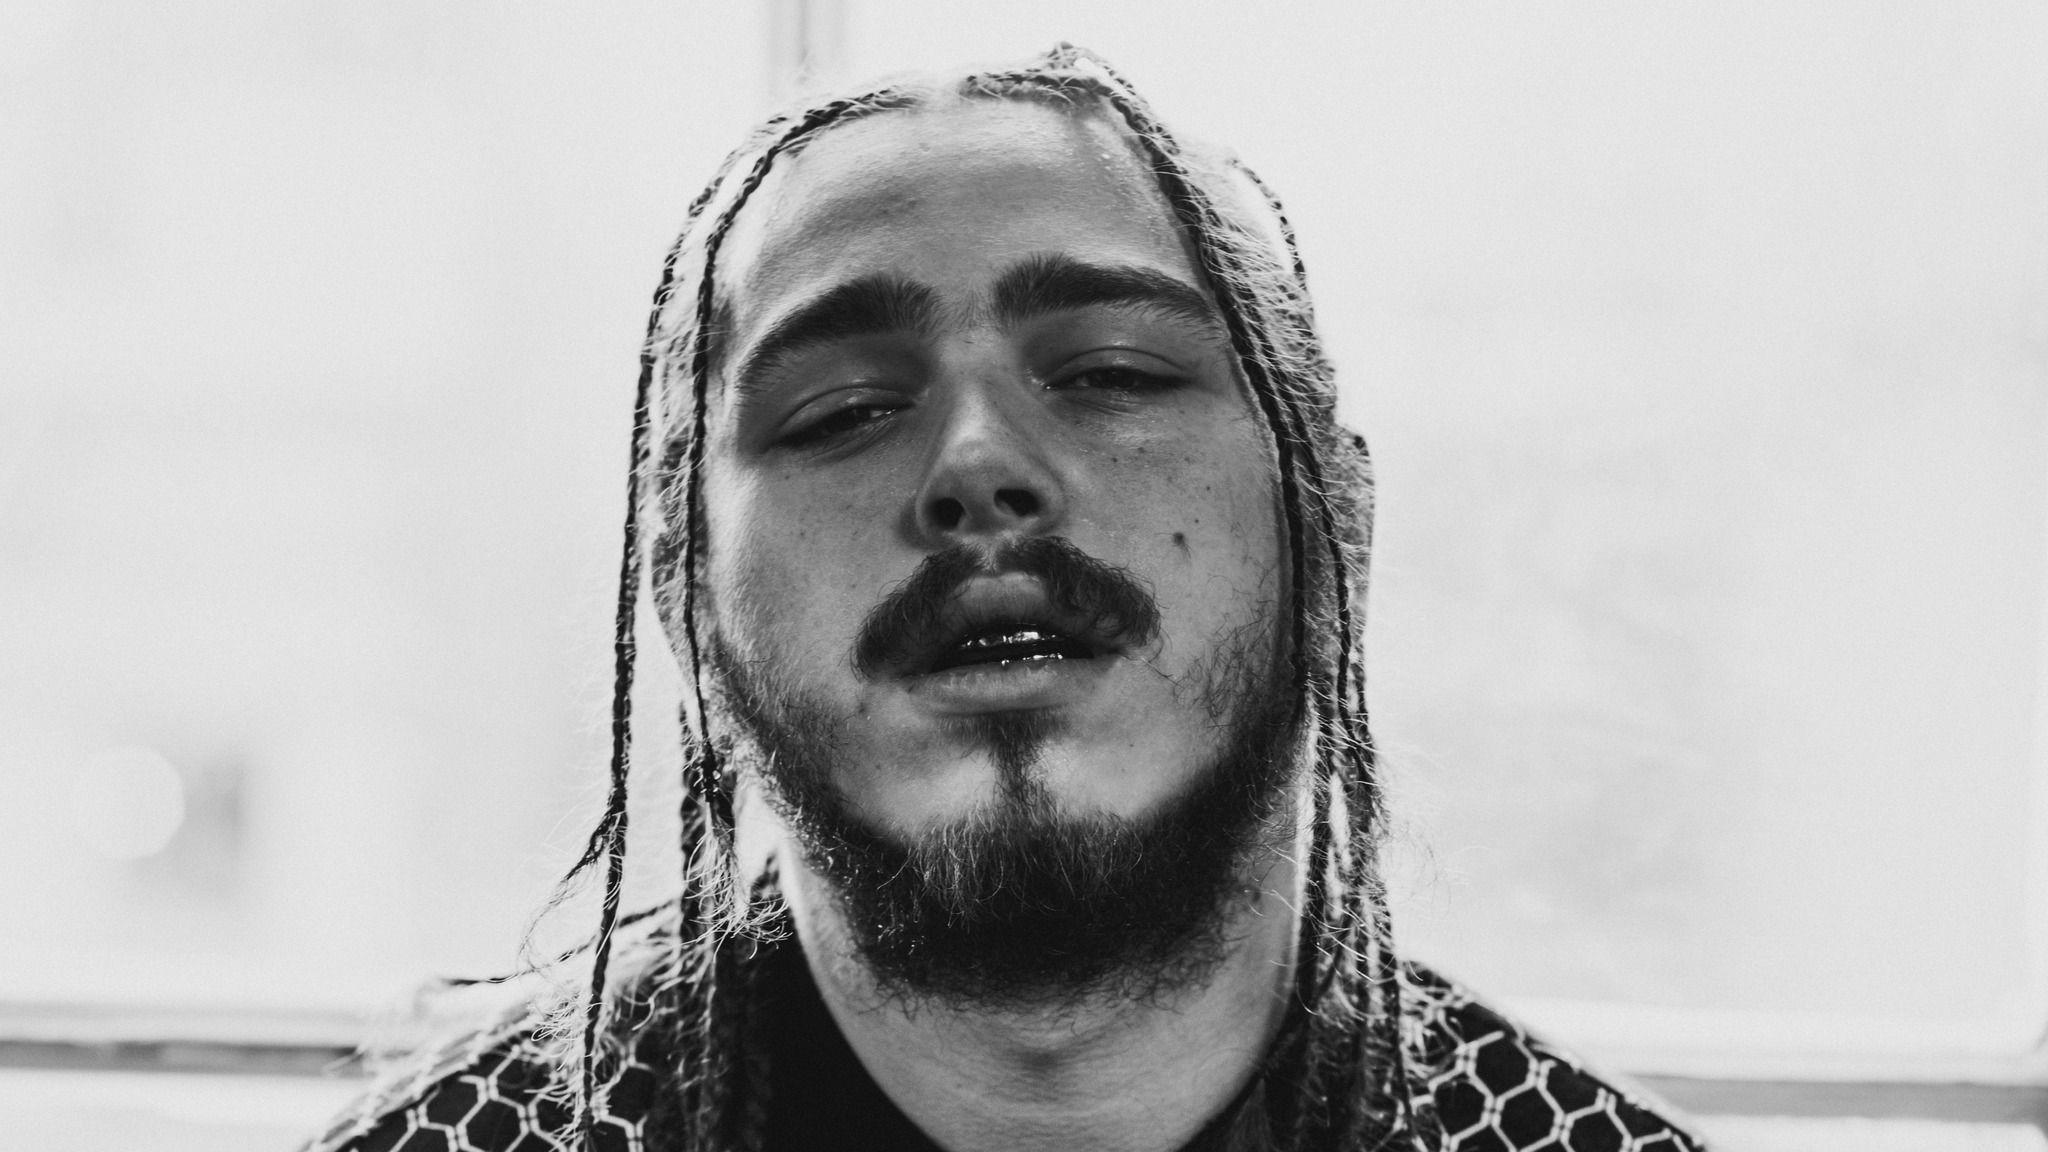 Post Malone Tickets. Post Malone Concert Tickets & Tour Dates